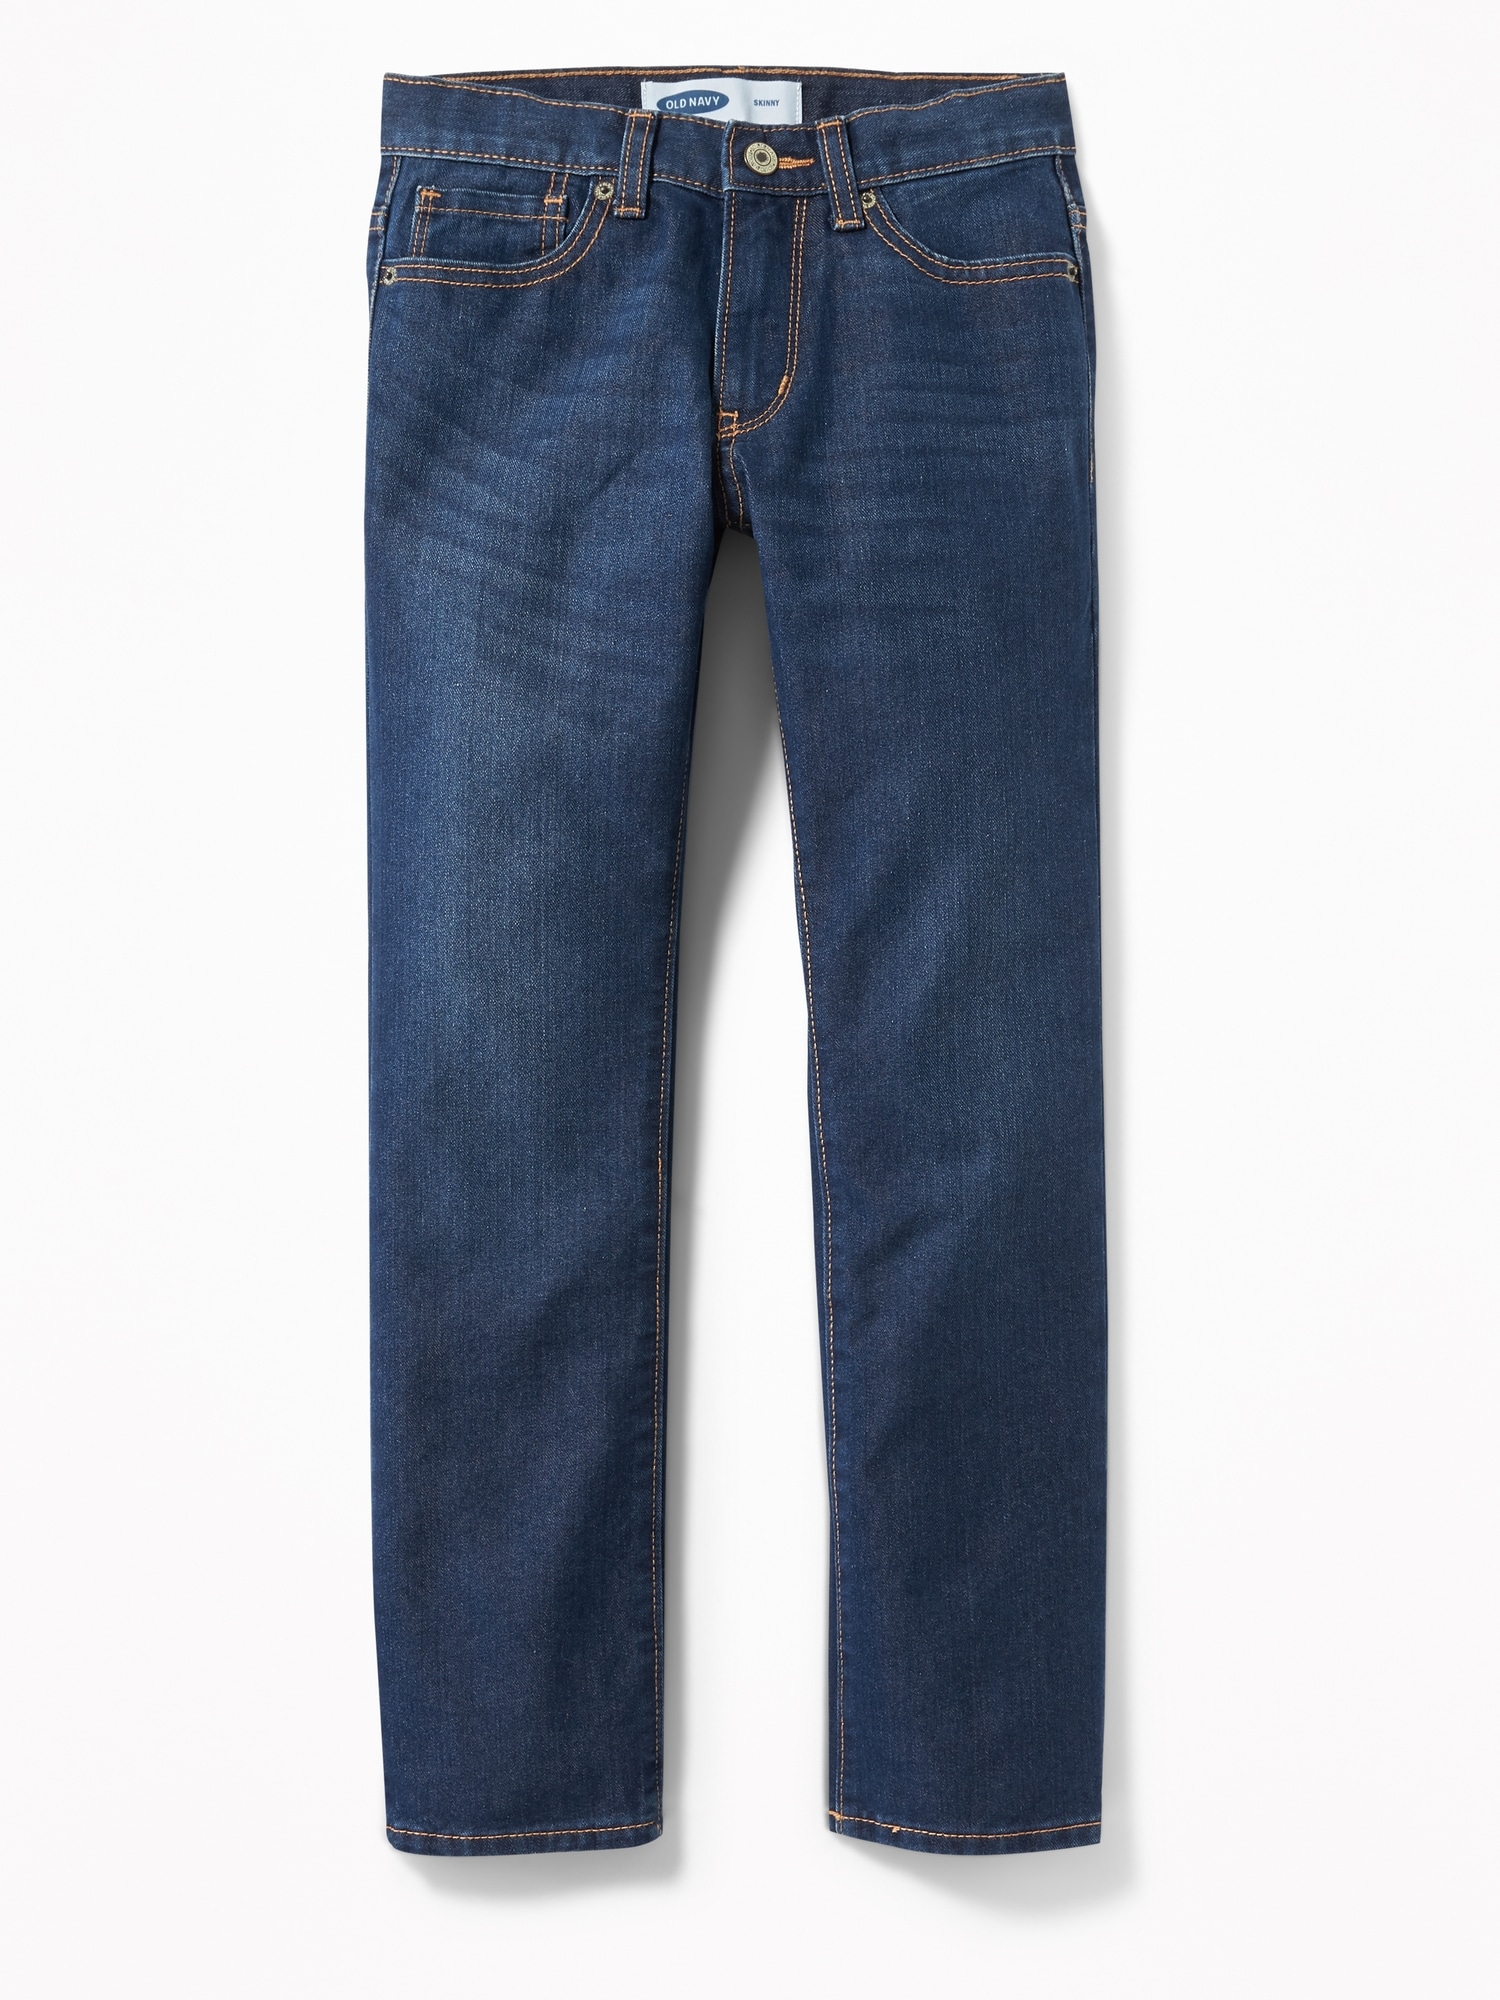 Wow Skinny Non-Stretch Jeans for Boys Hot Deal